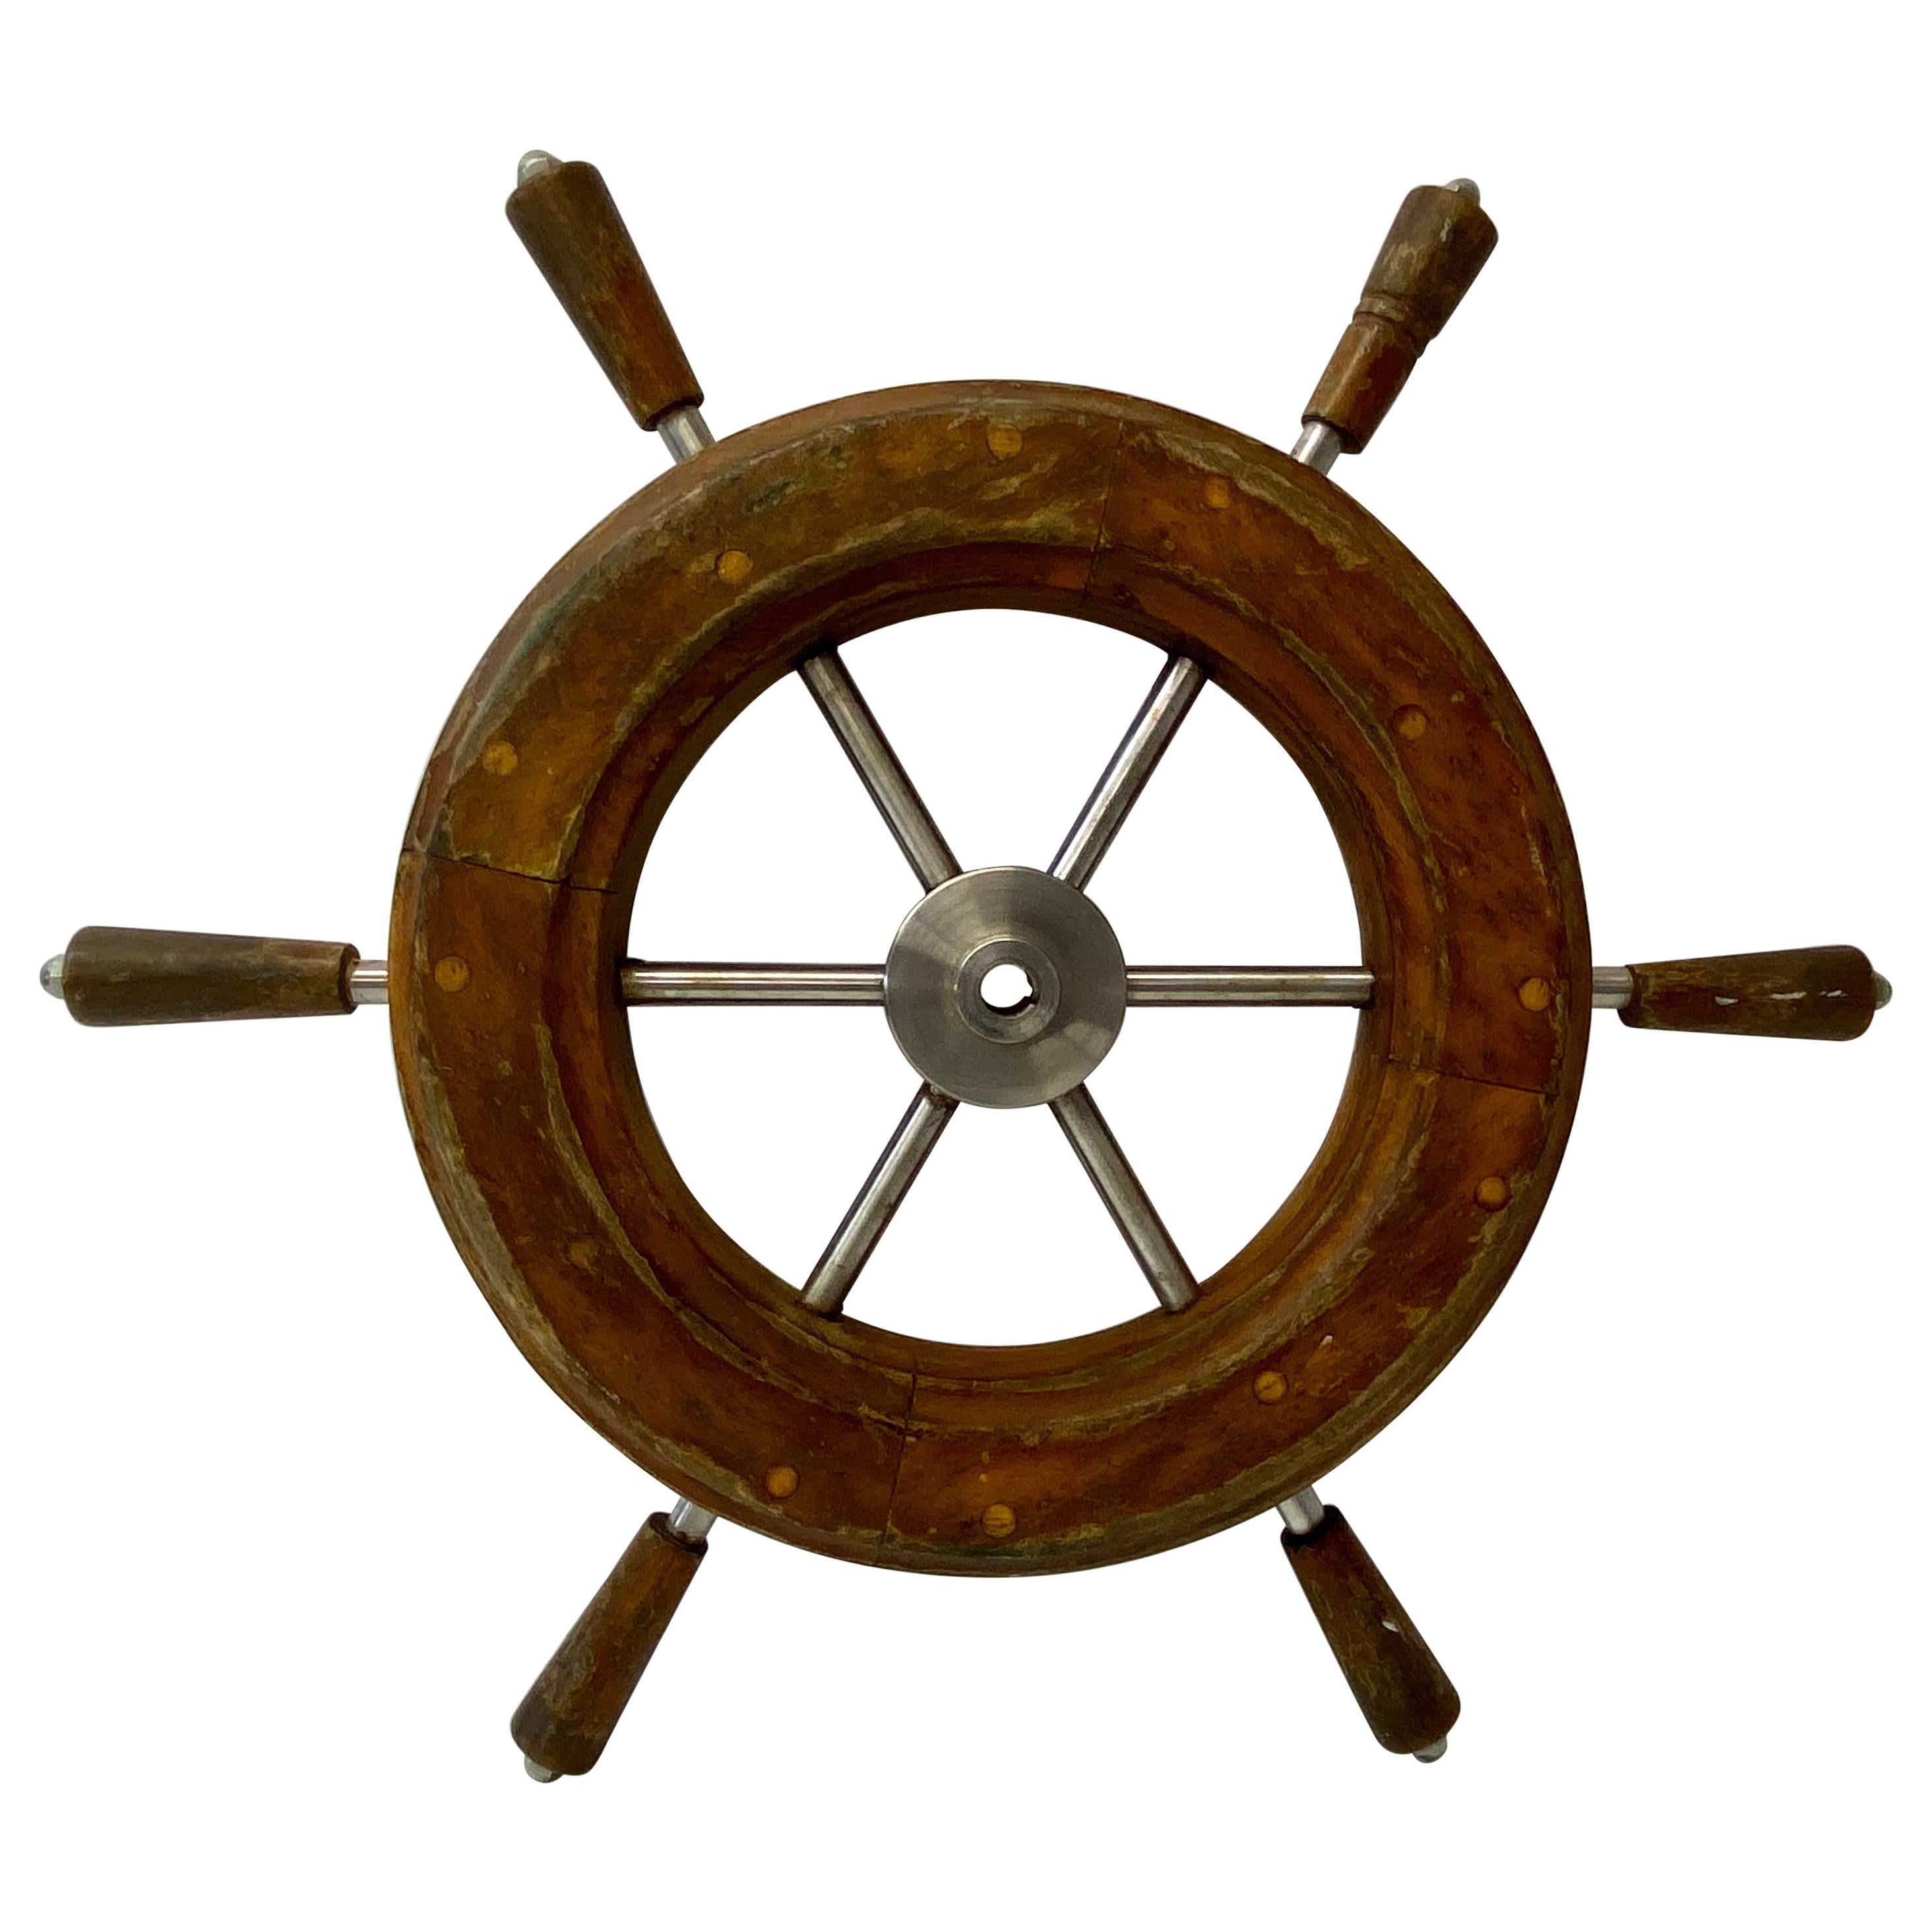 Early to Mid 20th Century Teak and Aluminum Ships Wheel 1930s to 1950s